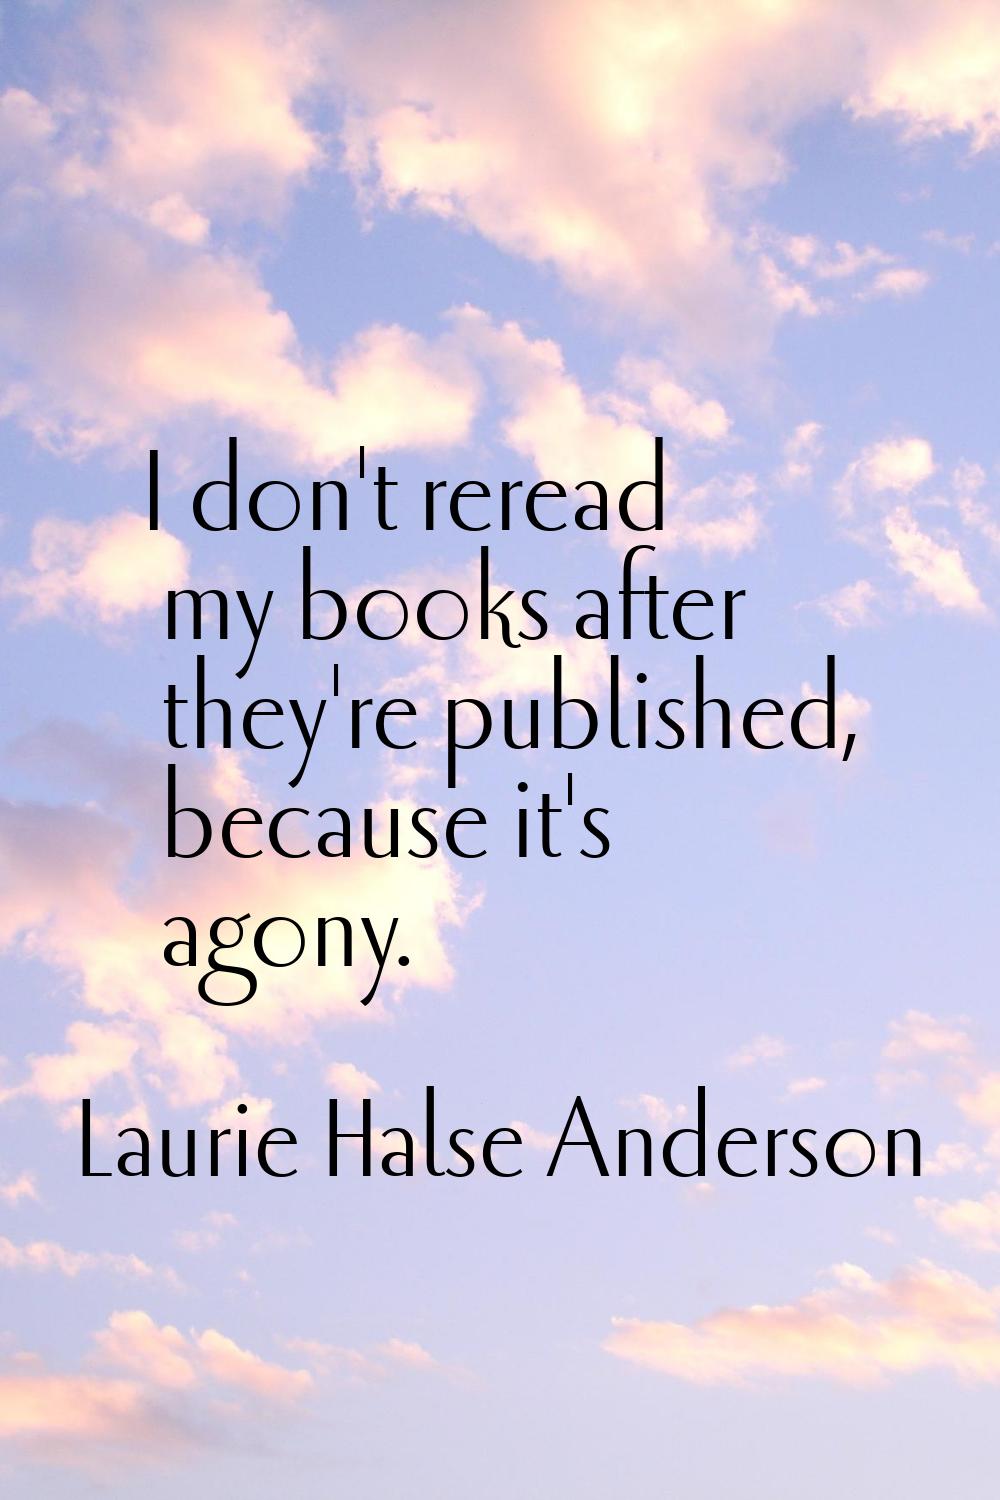 I don't reread my books after they're published, because it's agony.